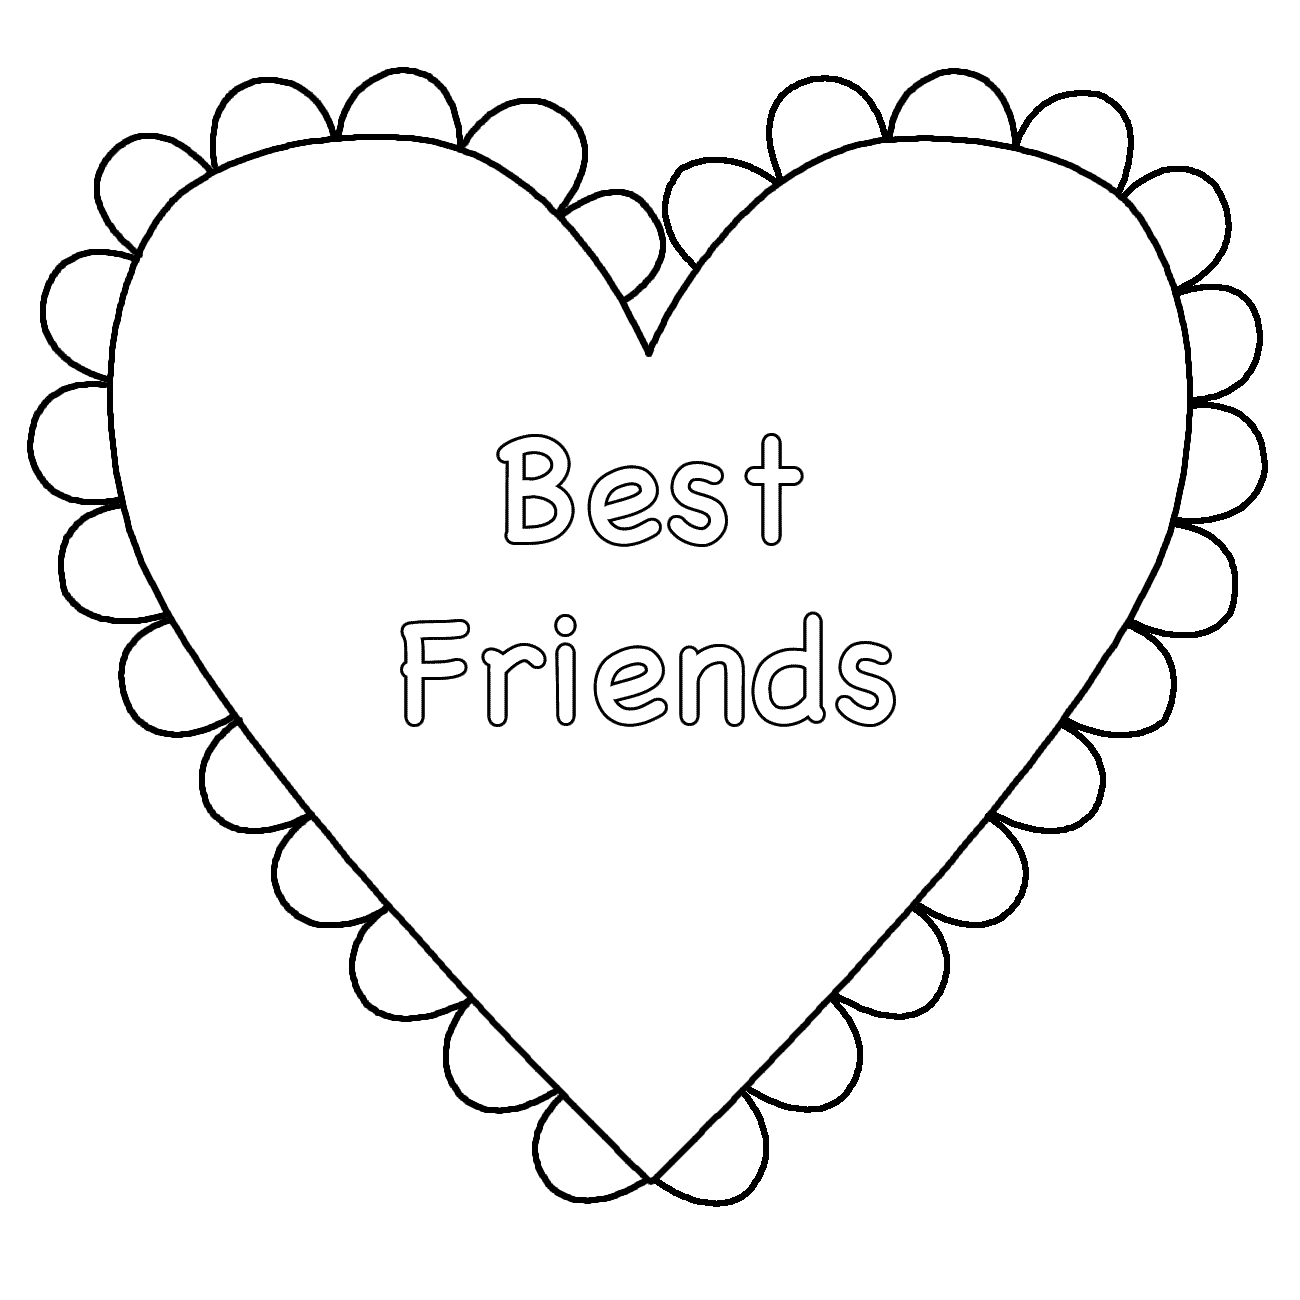 Best Friends Coloring Page - Coloring Pages for Kids and for Adults